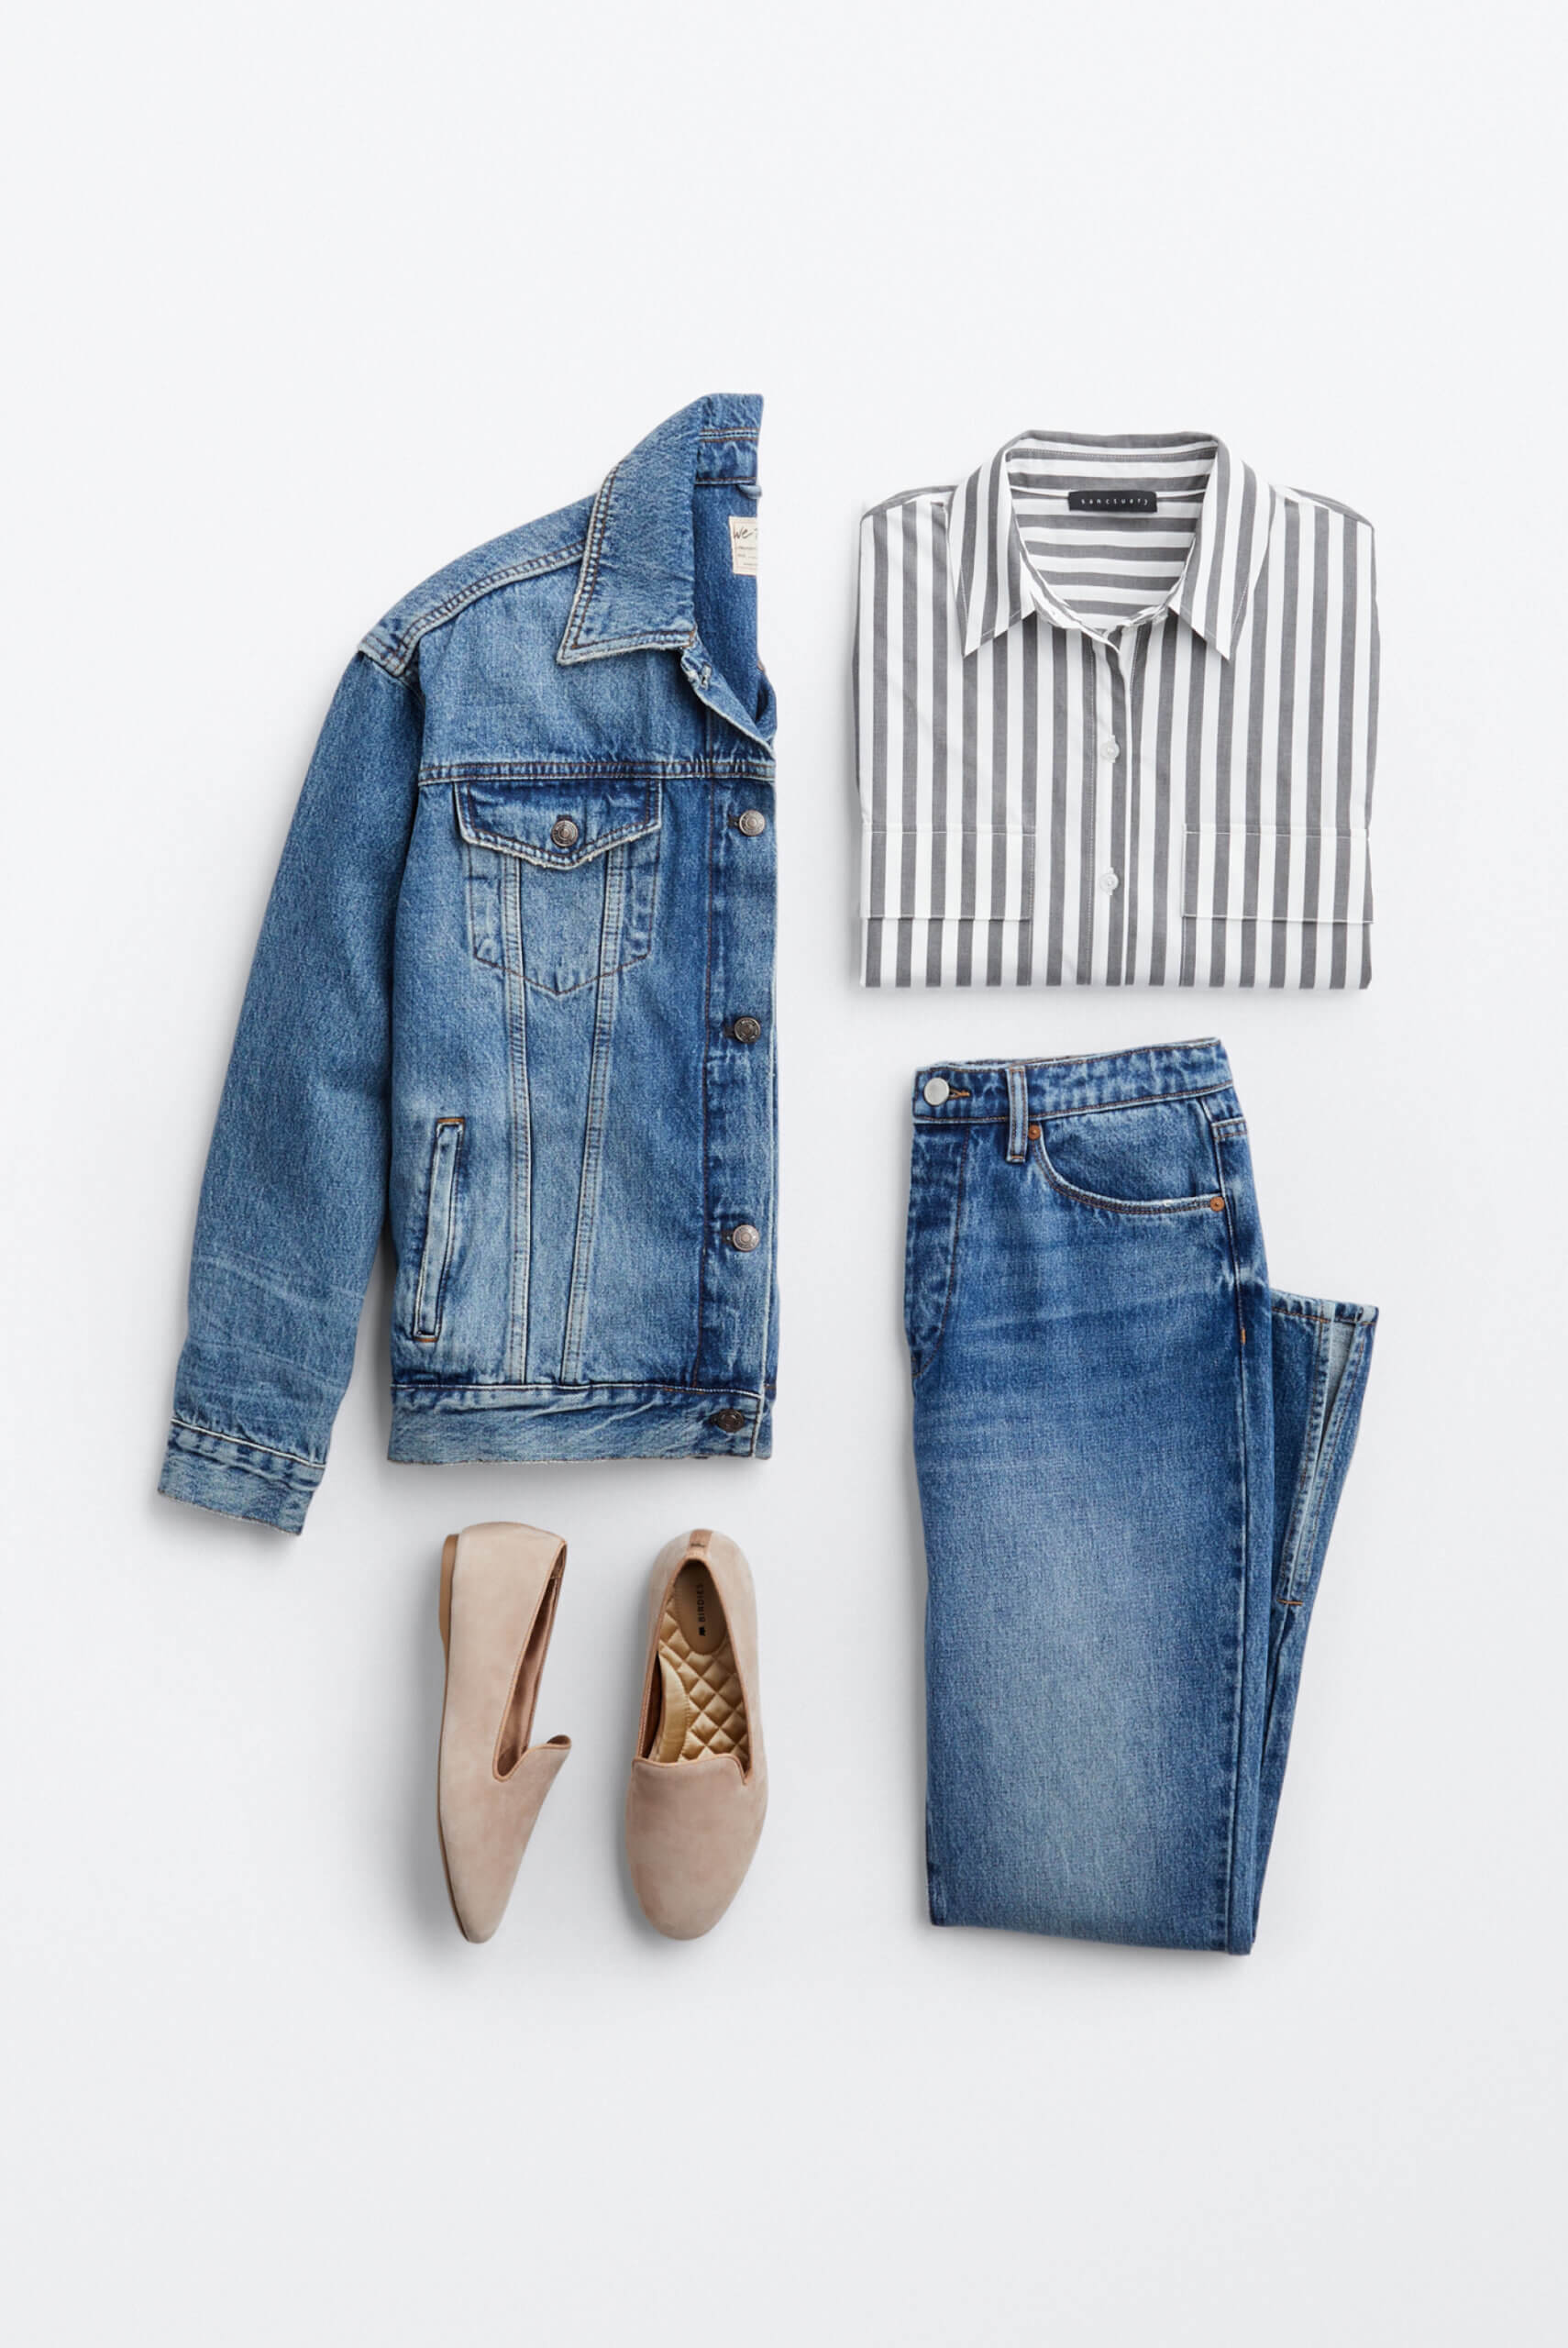 denim outfit for women over 60